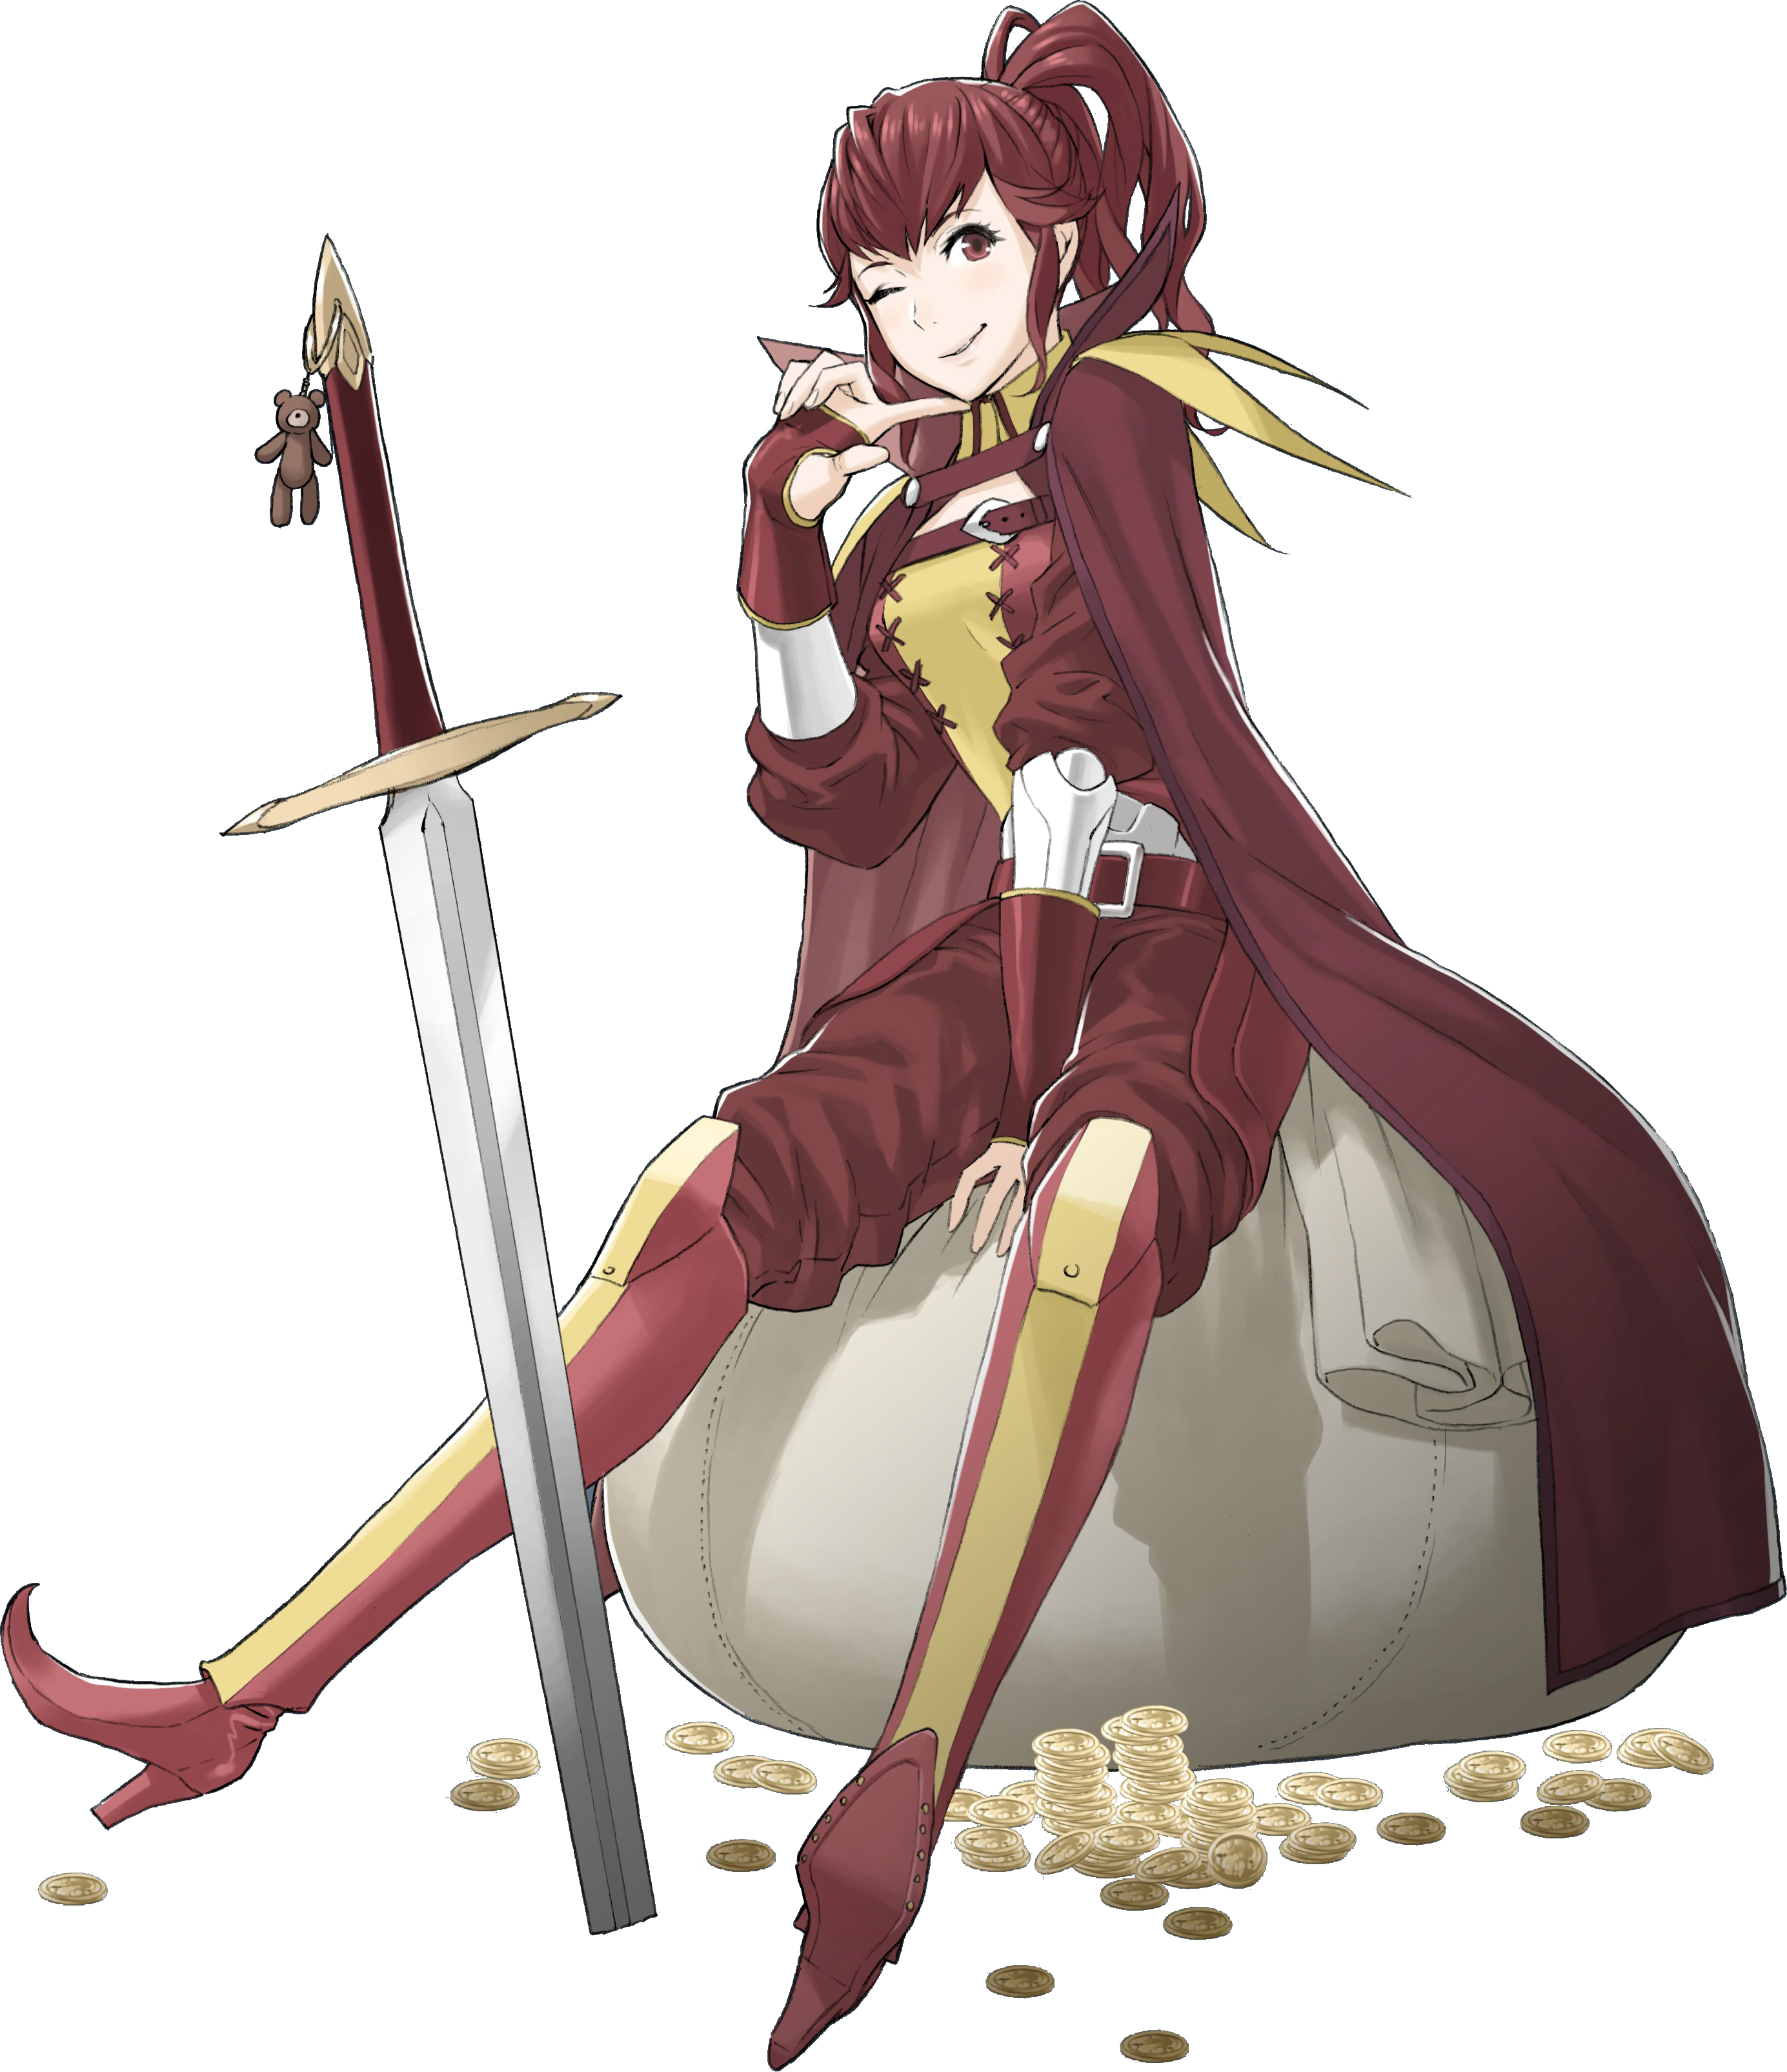 http://img2.wikia.nocookie.net/__cb20130509153335/fireemblem/images/3/3f/Anna_FE13_Artwork.png